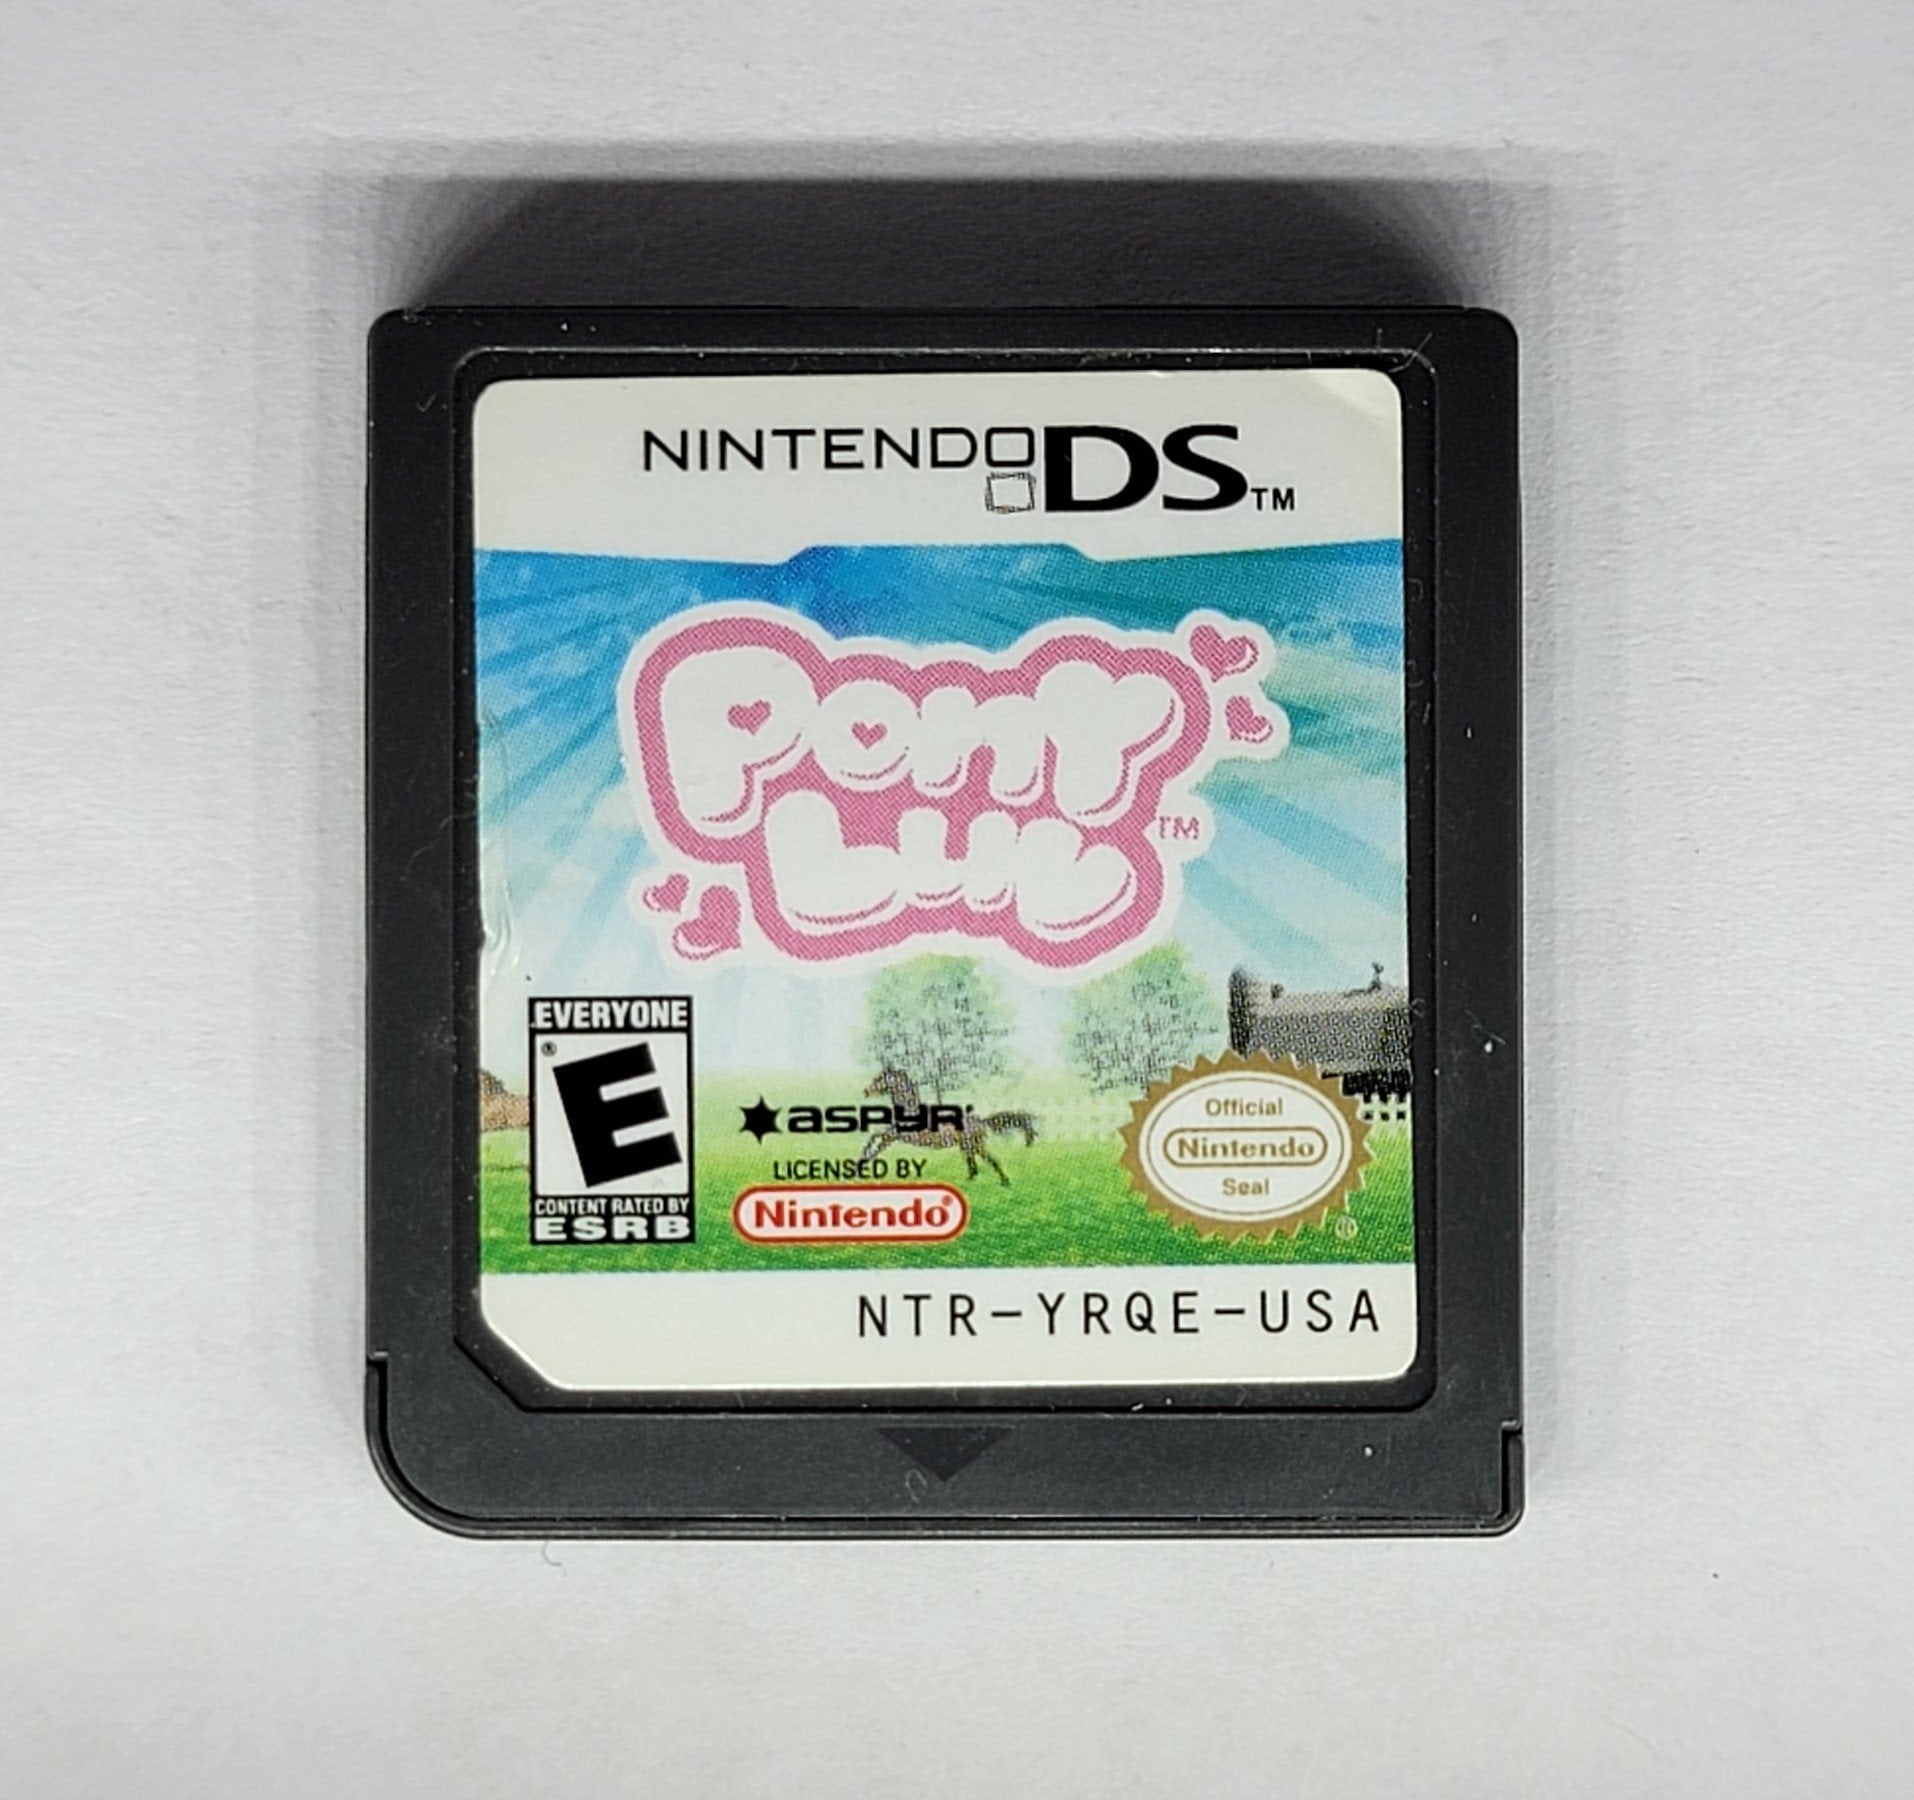 Pony Luv Nintendo DS Game: Care for Your Virtual Pony!  Xclusive Collectibles   